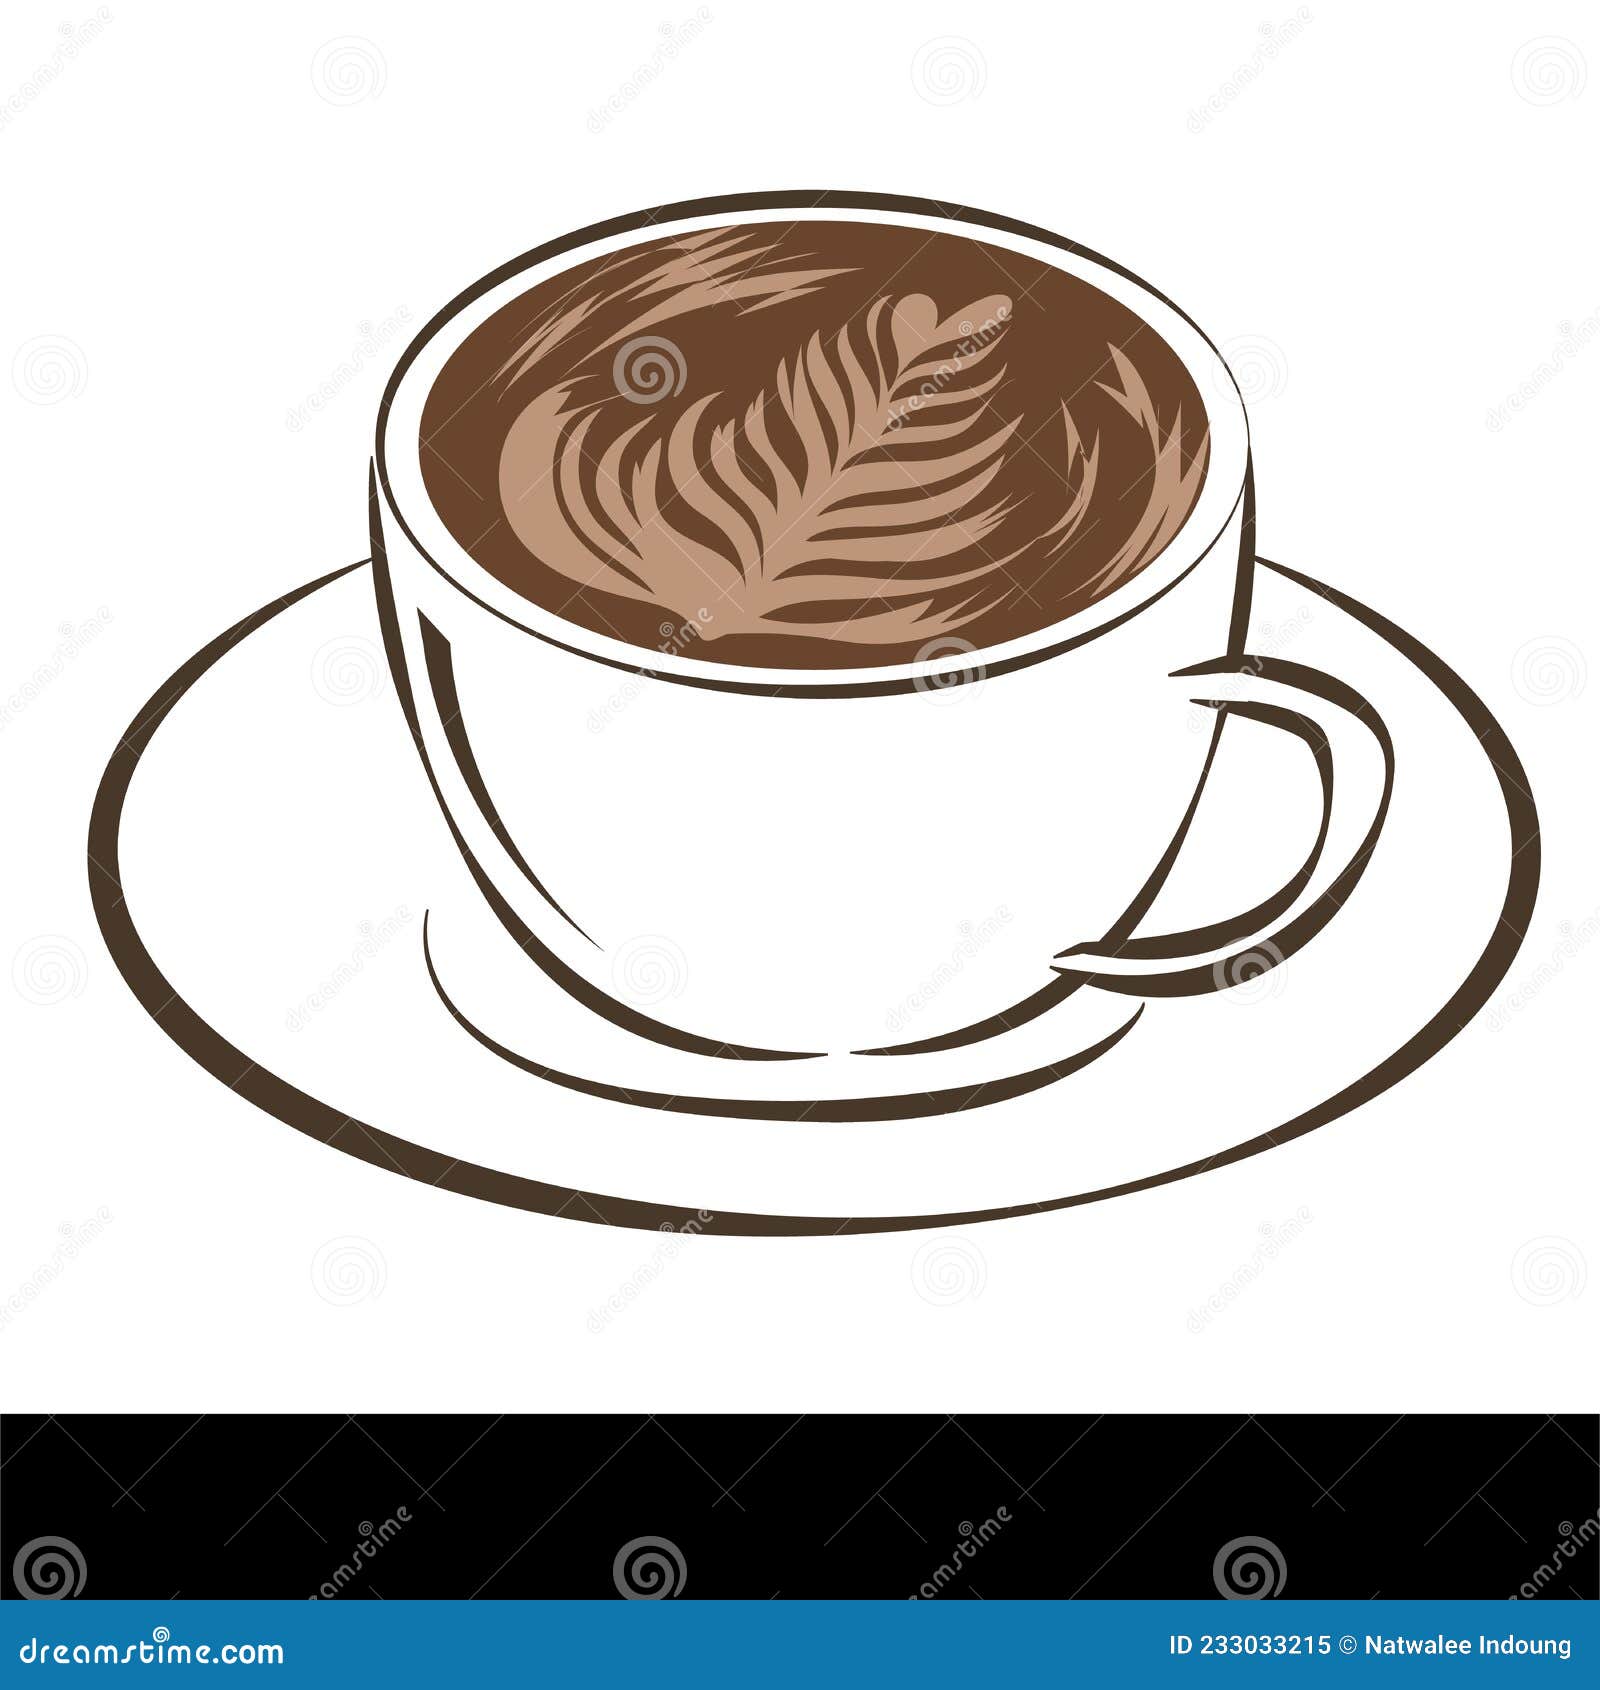 https://thumbs.dreamstime.com/z/coffee-cup-latte-art-hand-drawn-sketch-style-vintage-vector-engraving-illustration-label-web-isolated-white-background-233033215.jpg